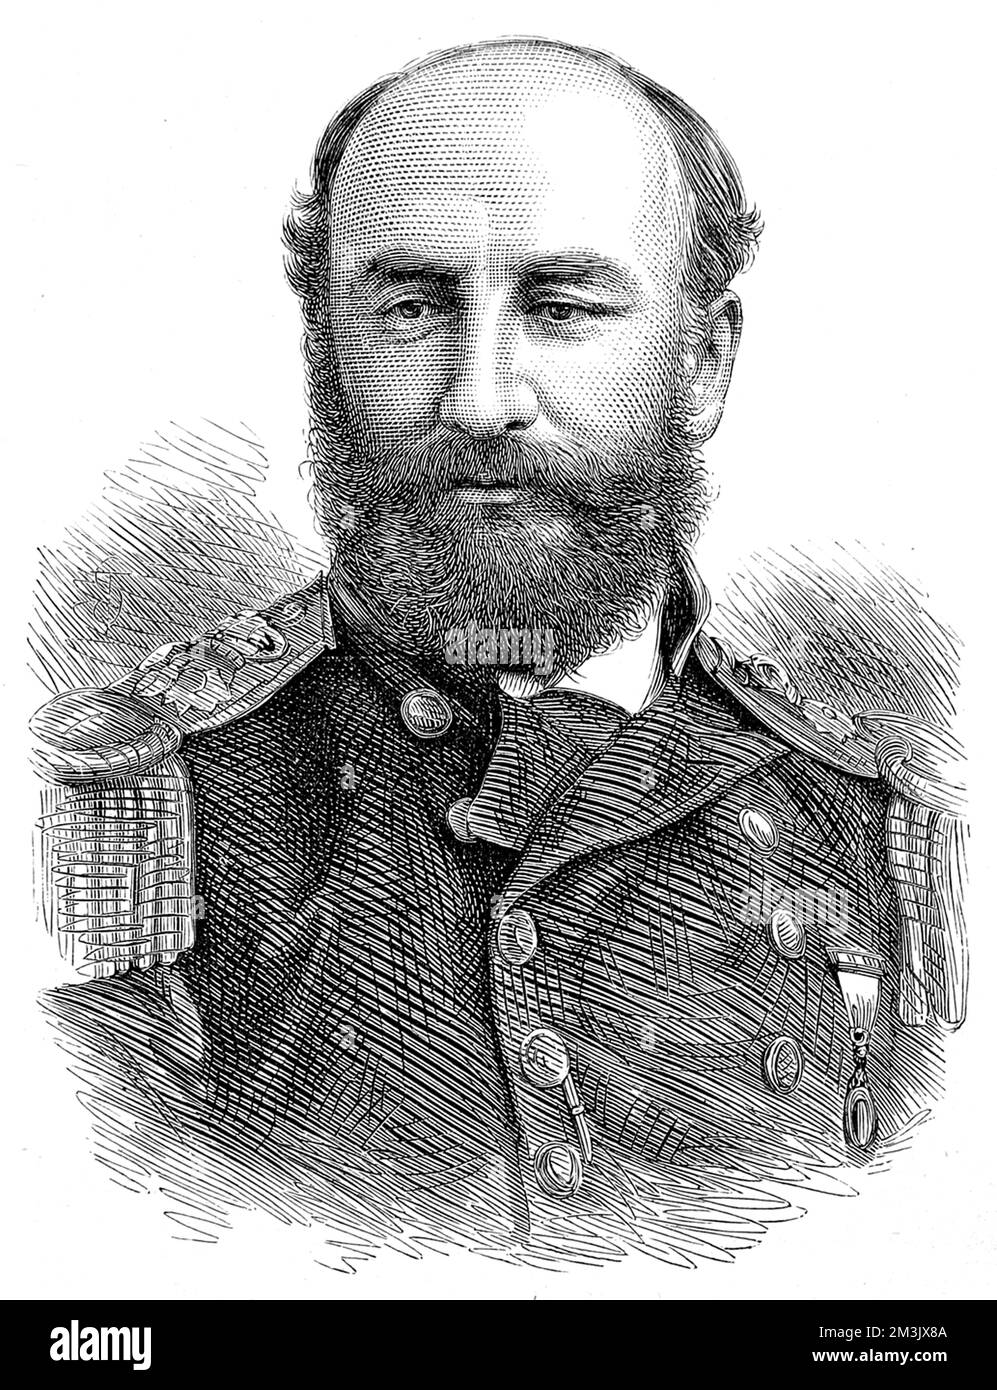 Sir George Strong Nares (1831 - 1915), Scottish naval commander and explorer, engraving in 1875 when he was a Royal Navy Captain in charge of the 1875-1876 British Arctic Expedition. Stock Photo